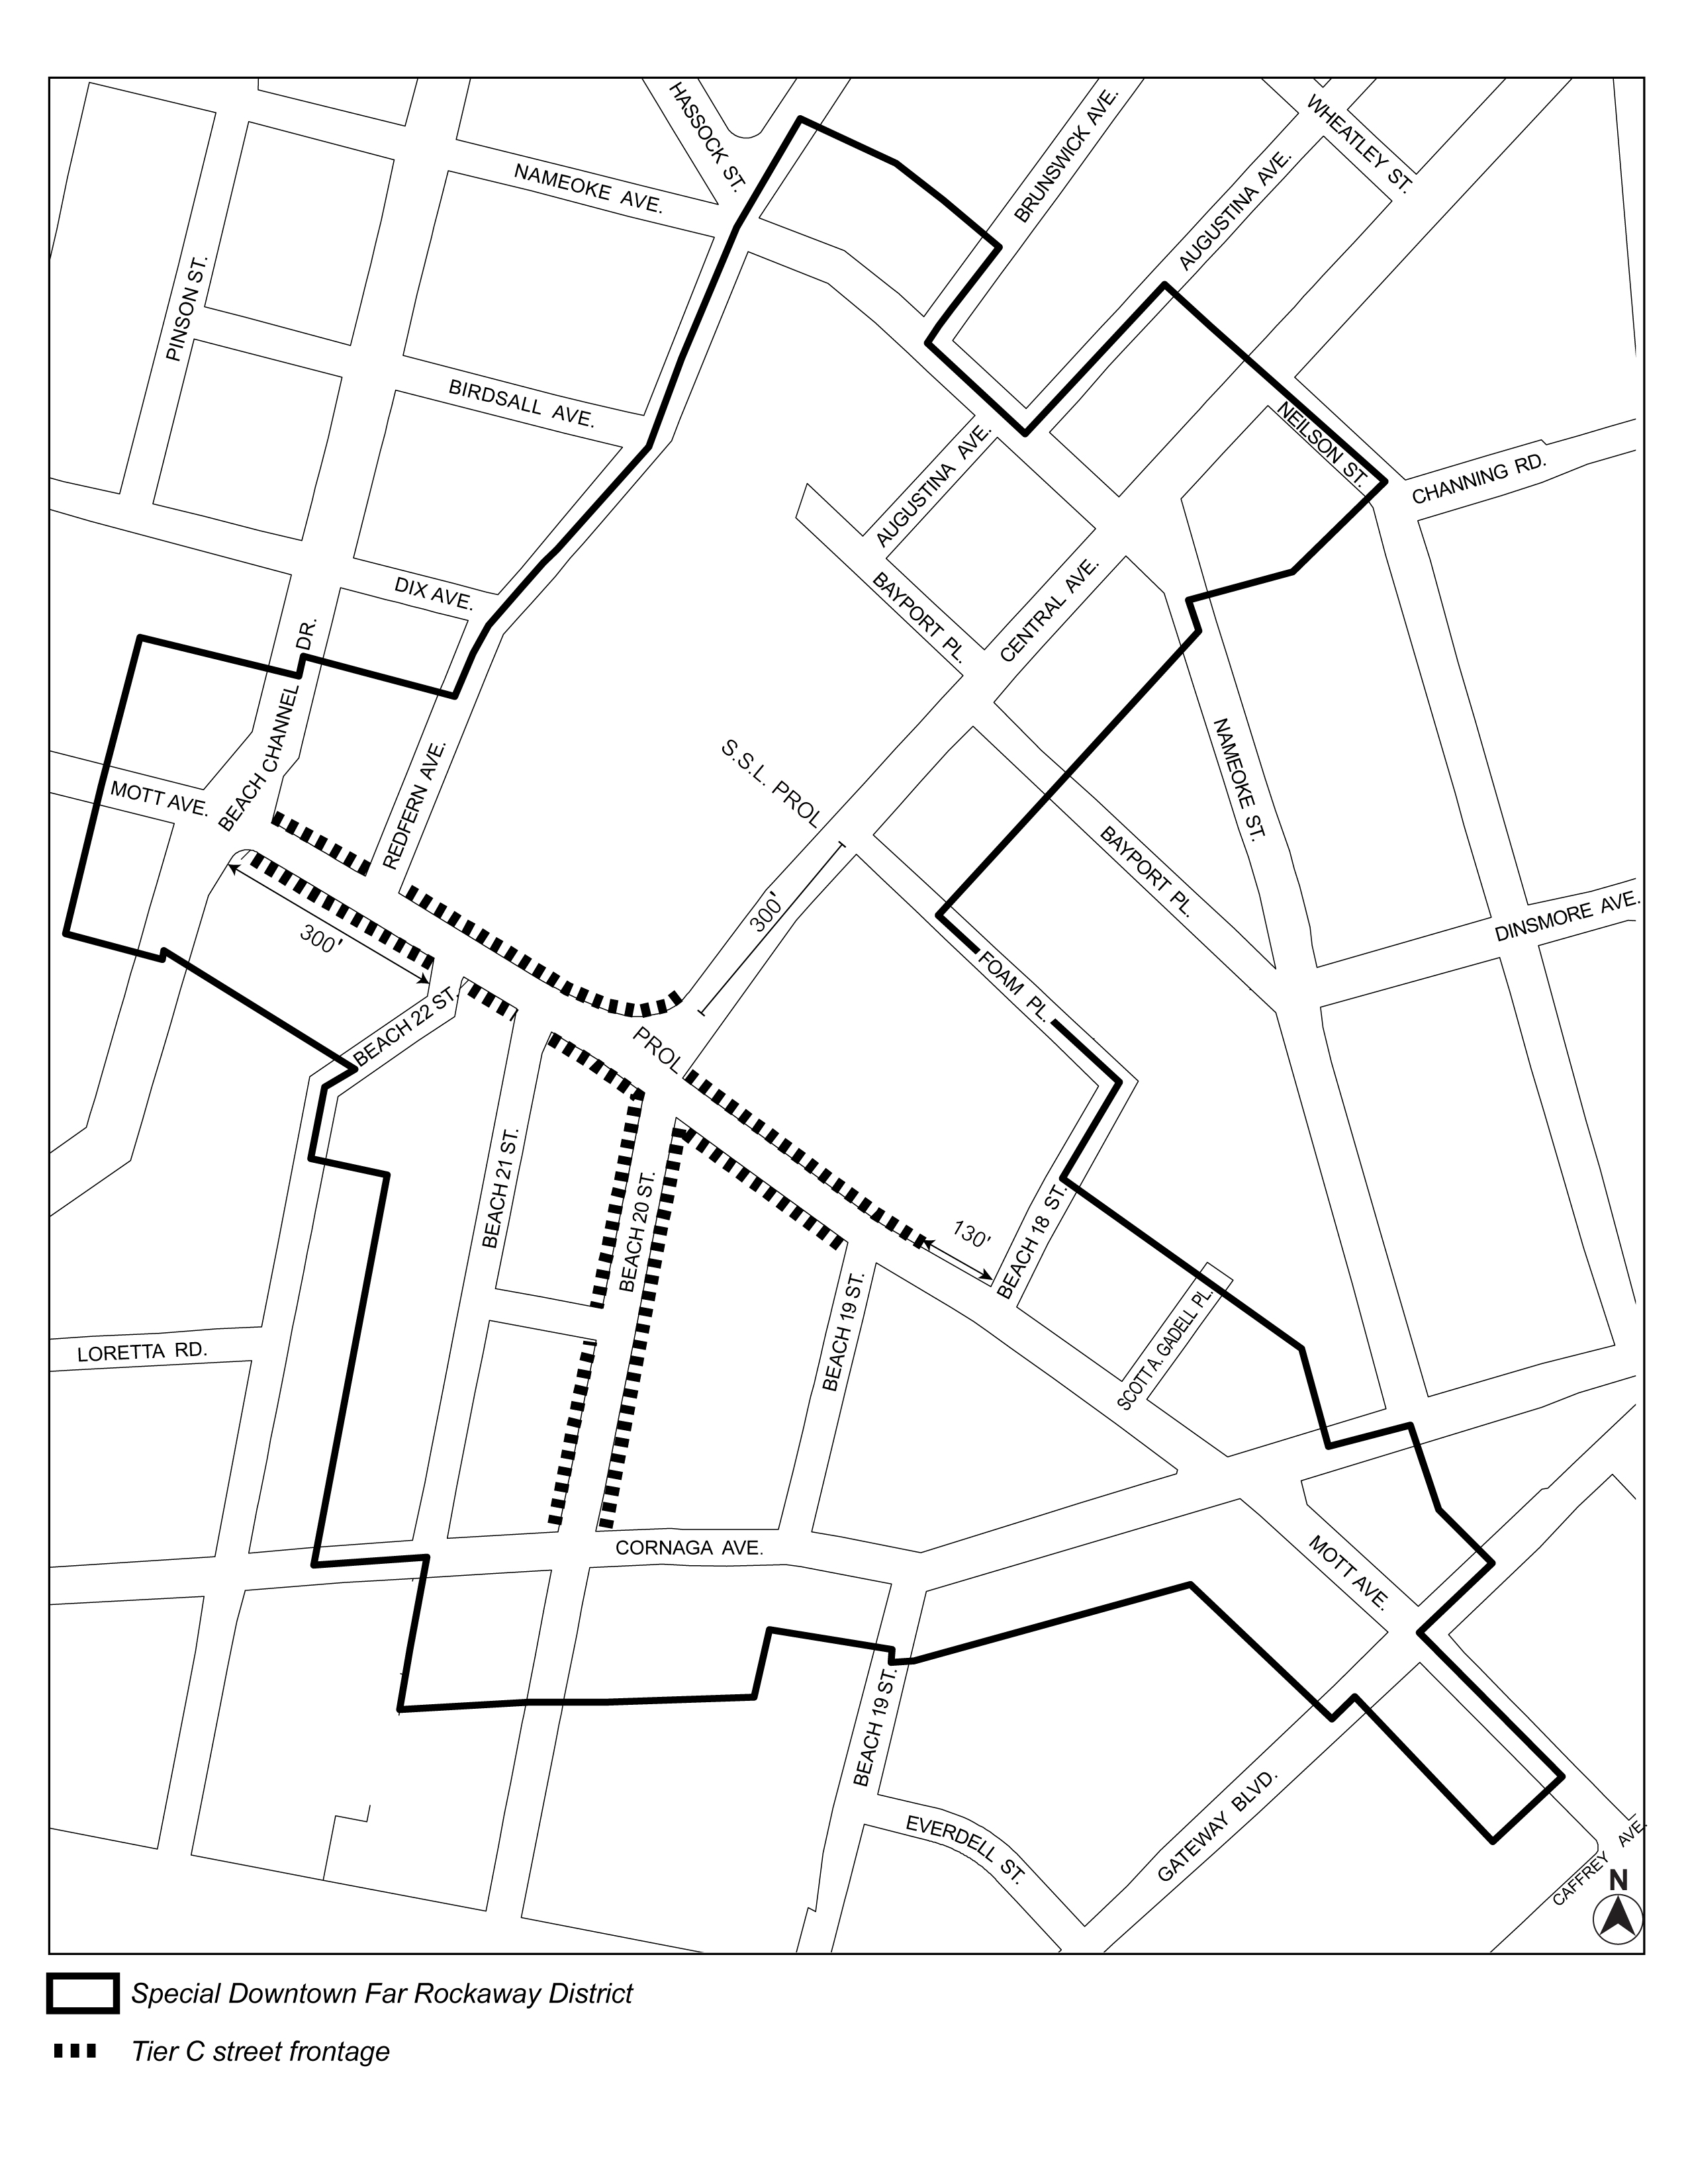 Article 13, Chapter 6 Special Downtown Far Rockaway District - Appendix (Map 3 - Ground Floor Use and Transparency Requirements) 